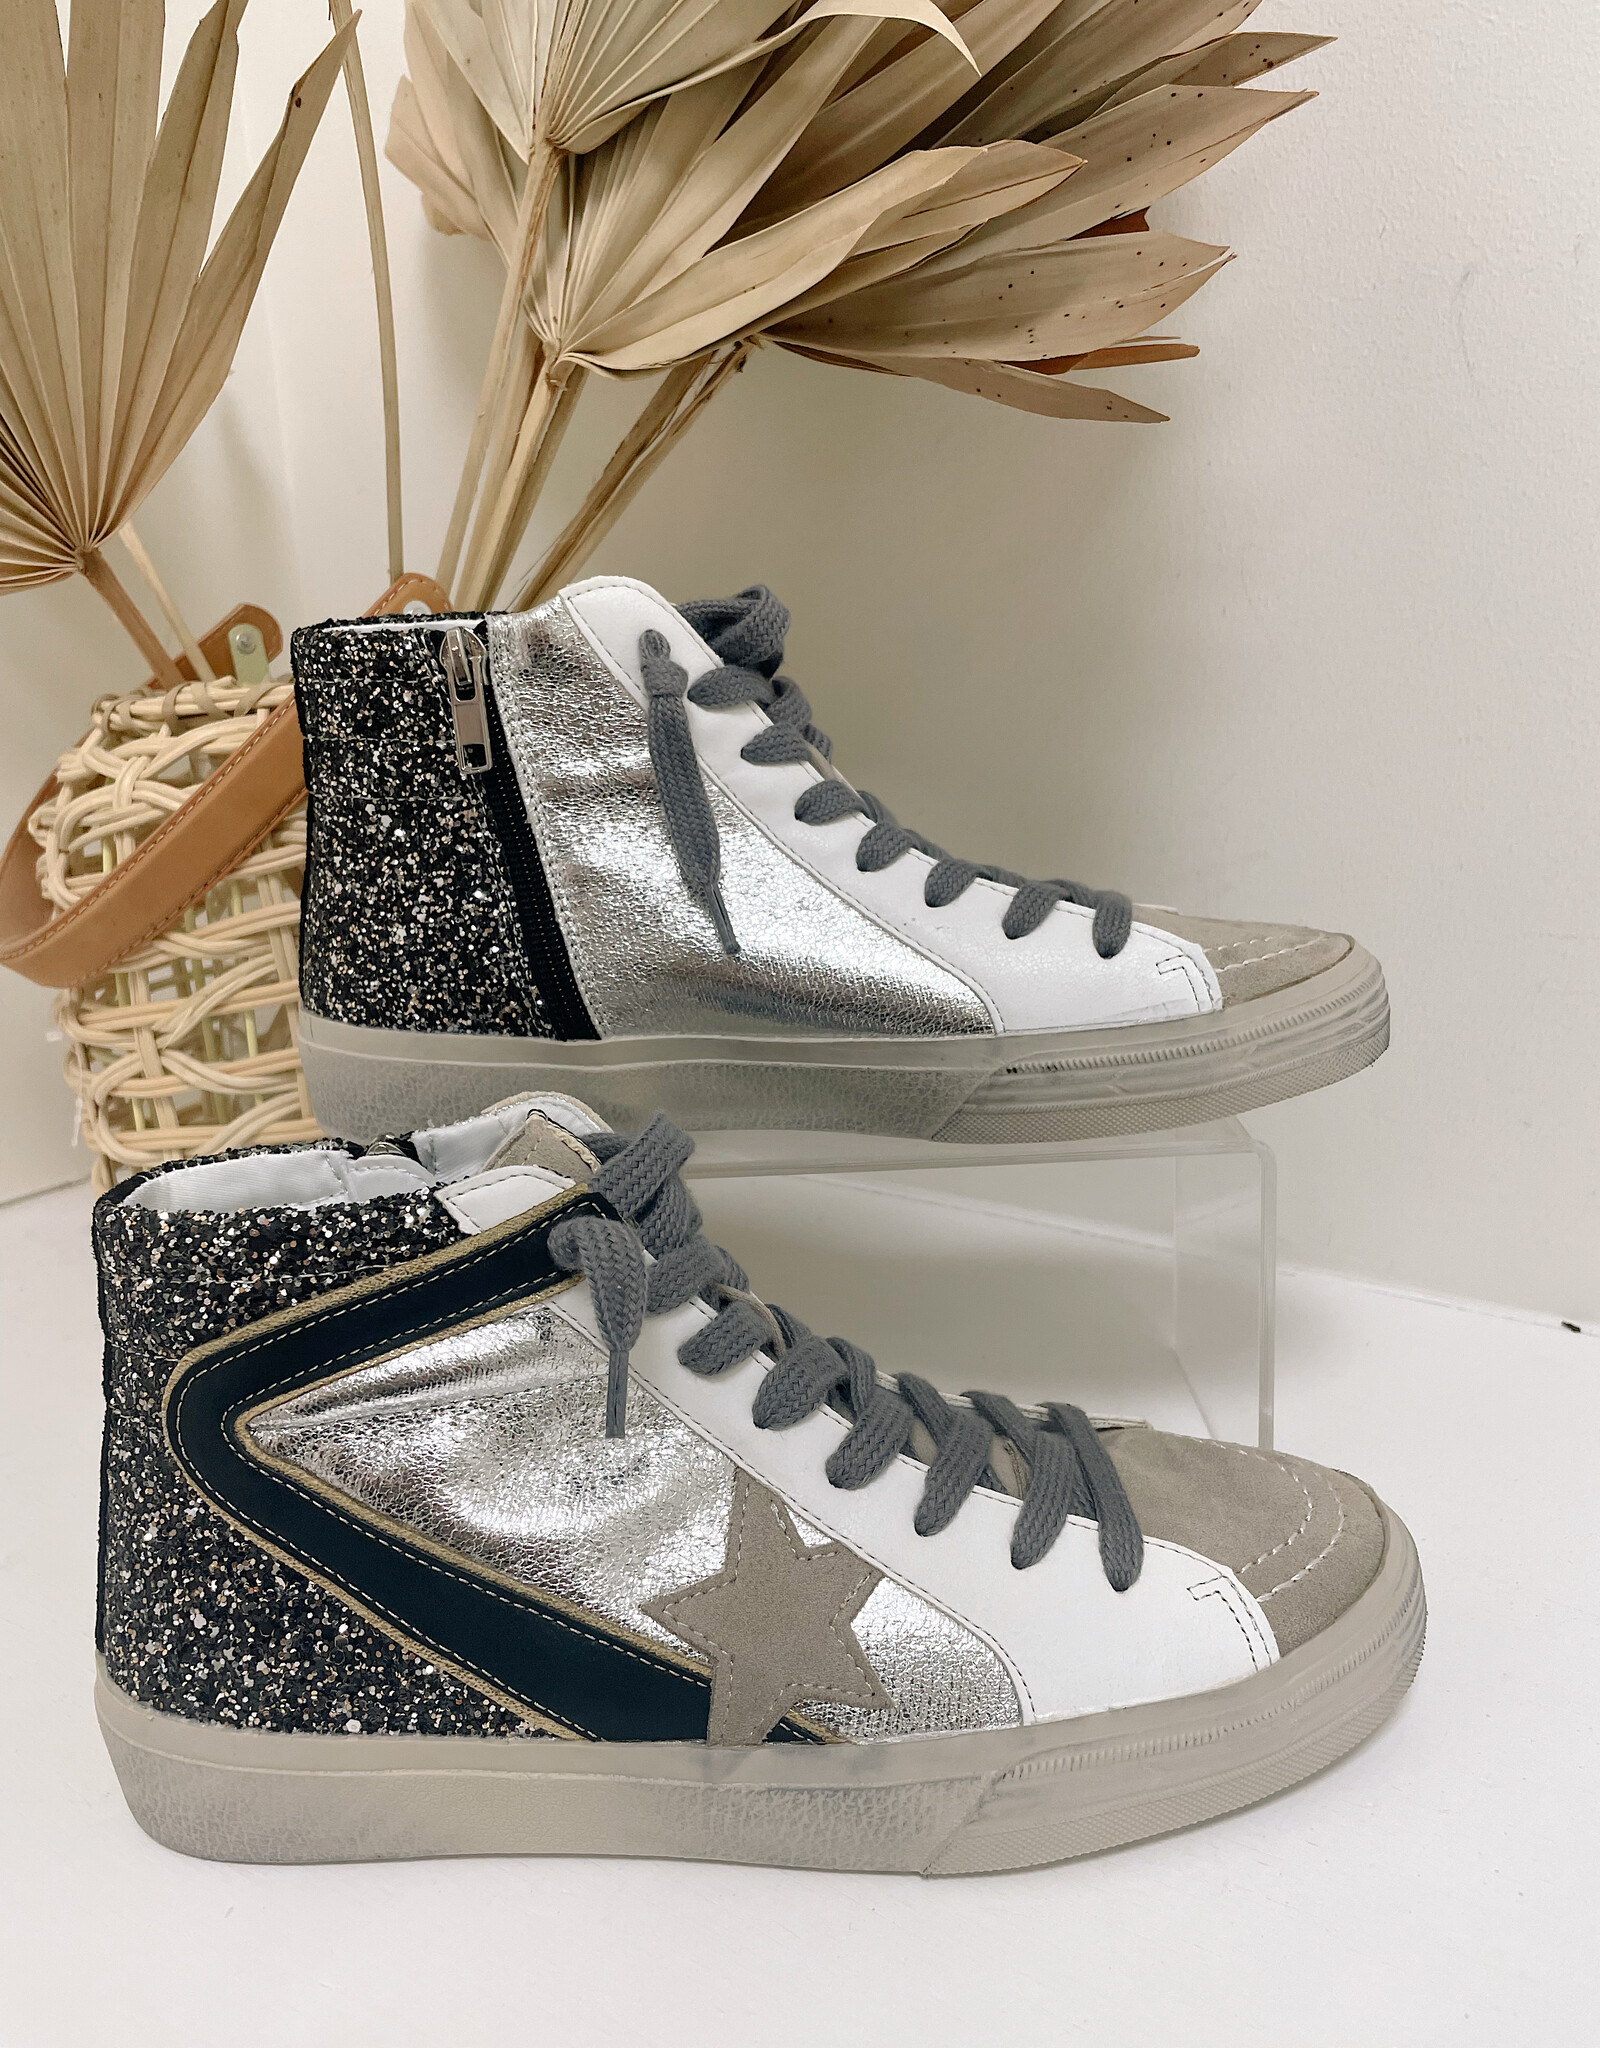 Passion High Top Sneaker